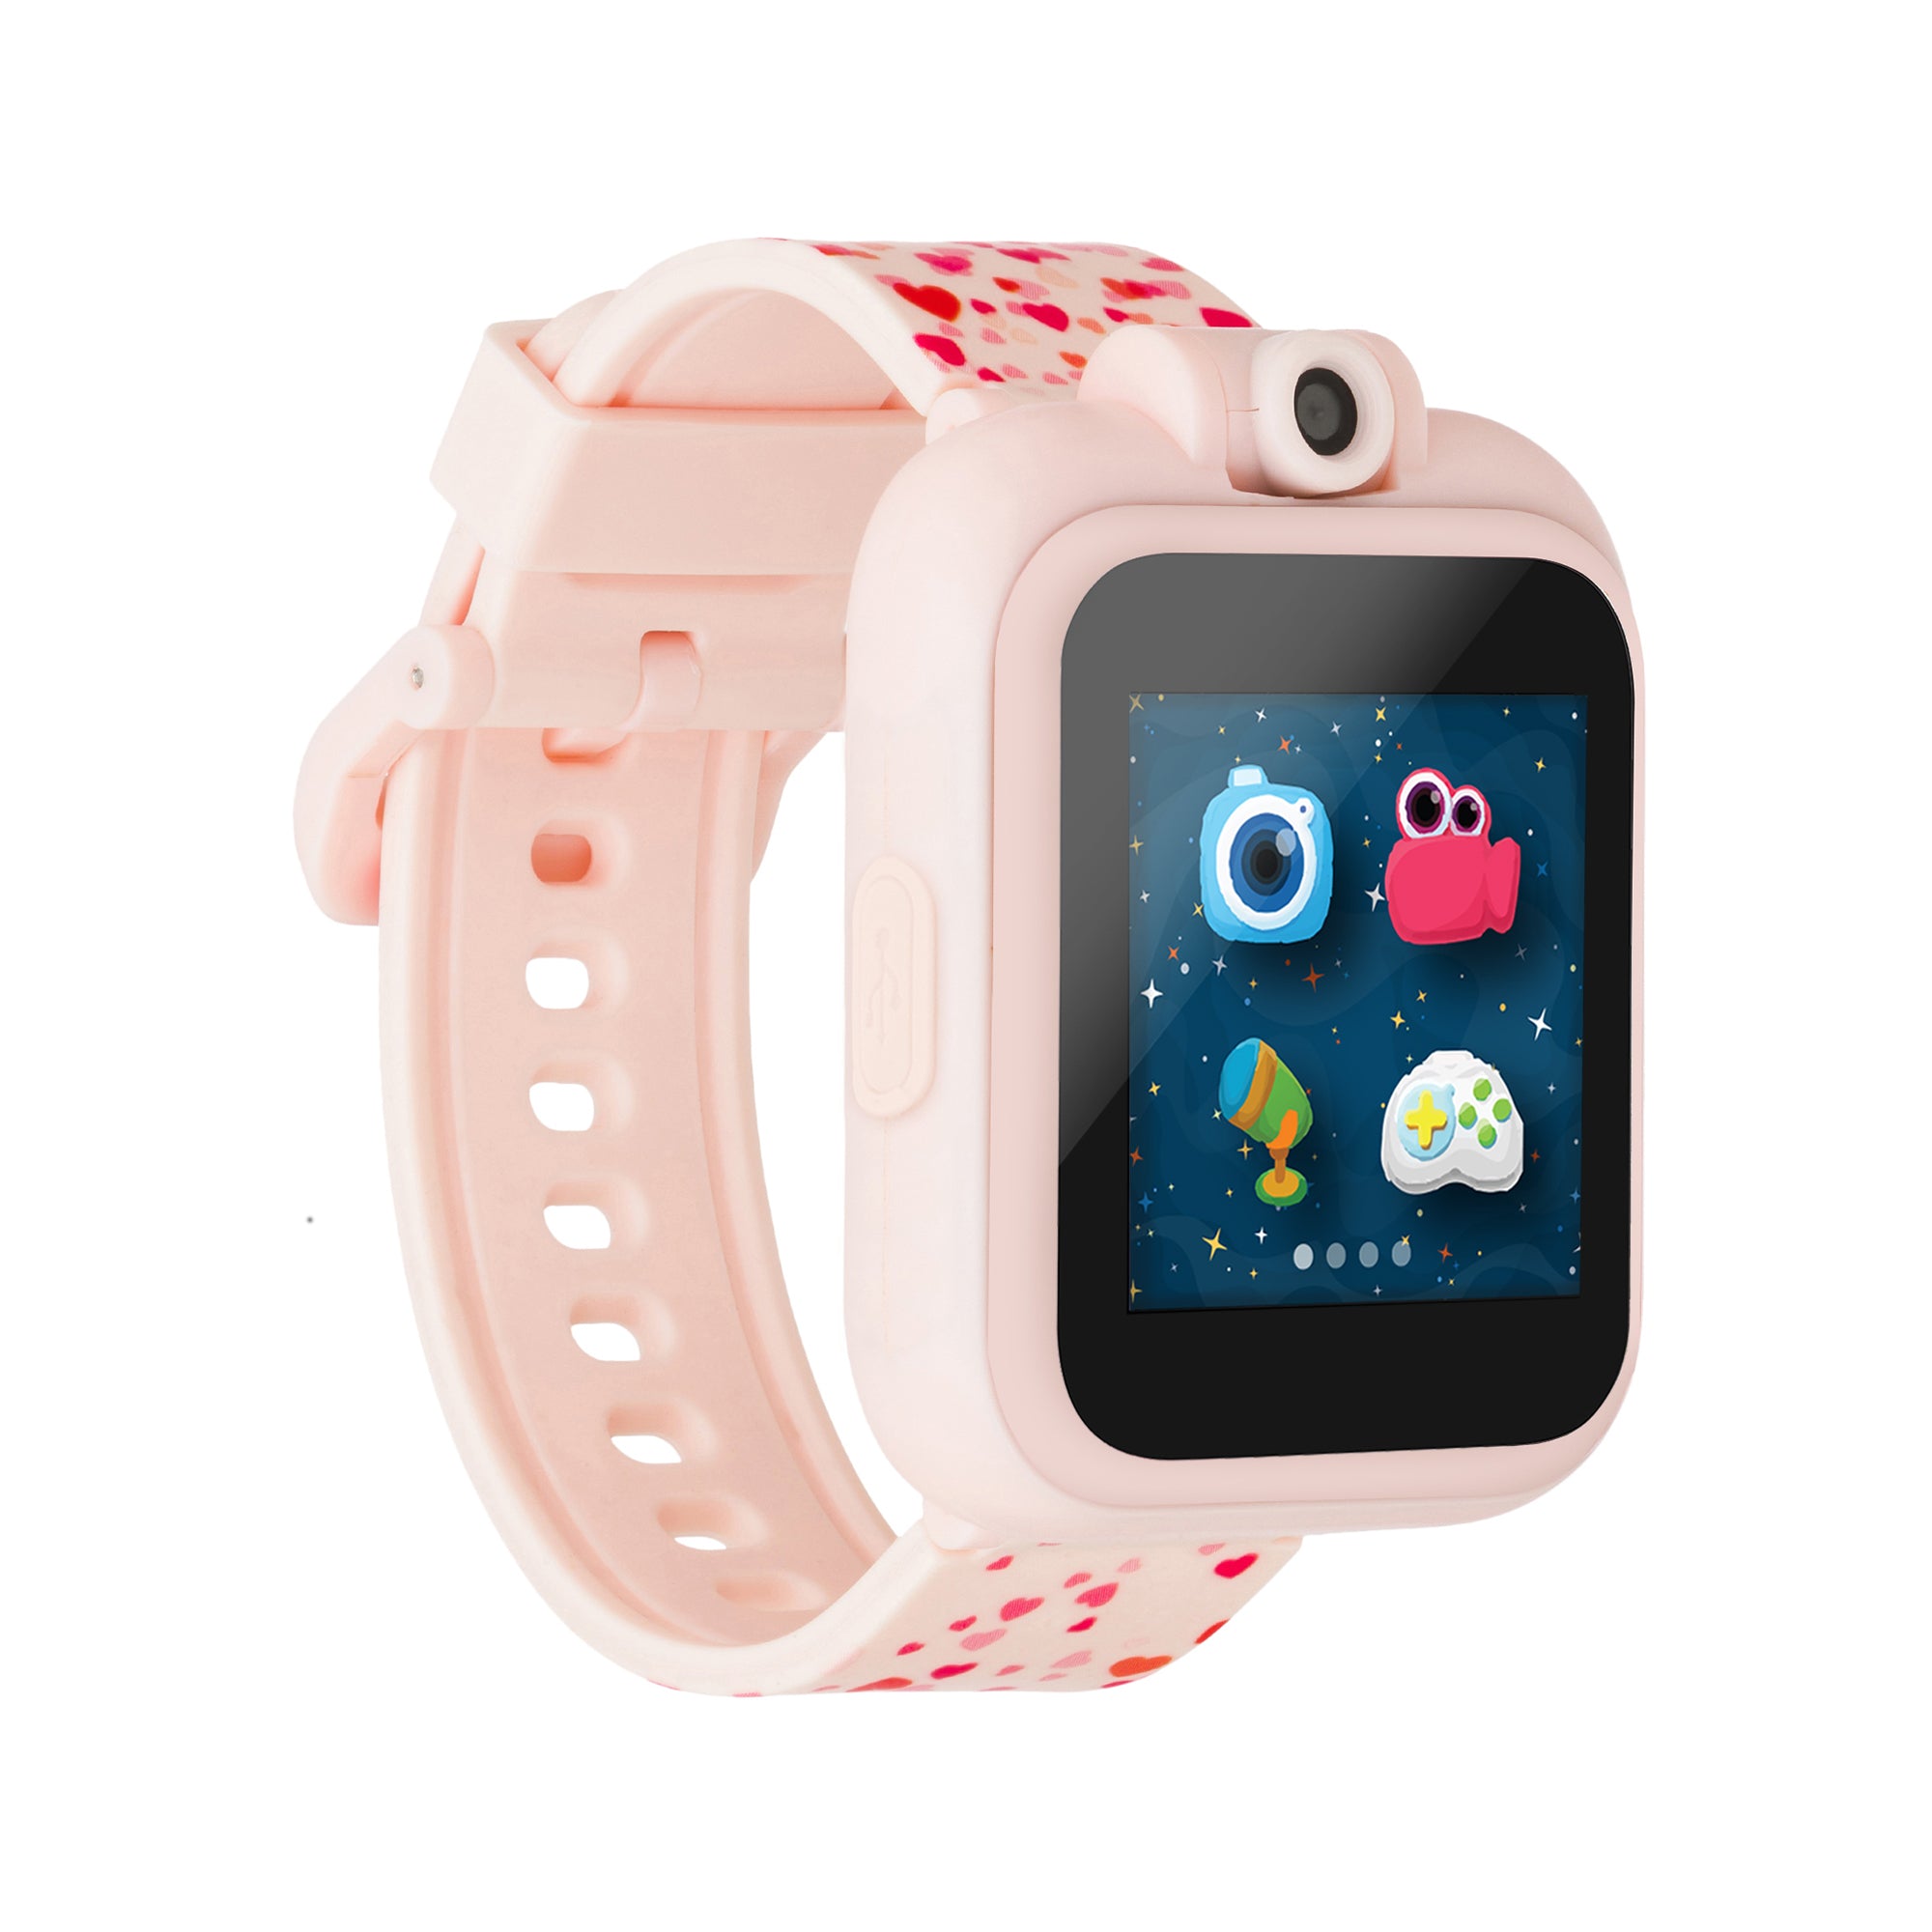 PlayZoom Smartwatch for Kids: Blush Heart affordable smart watch